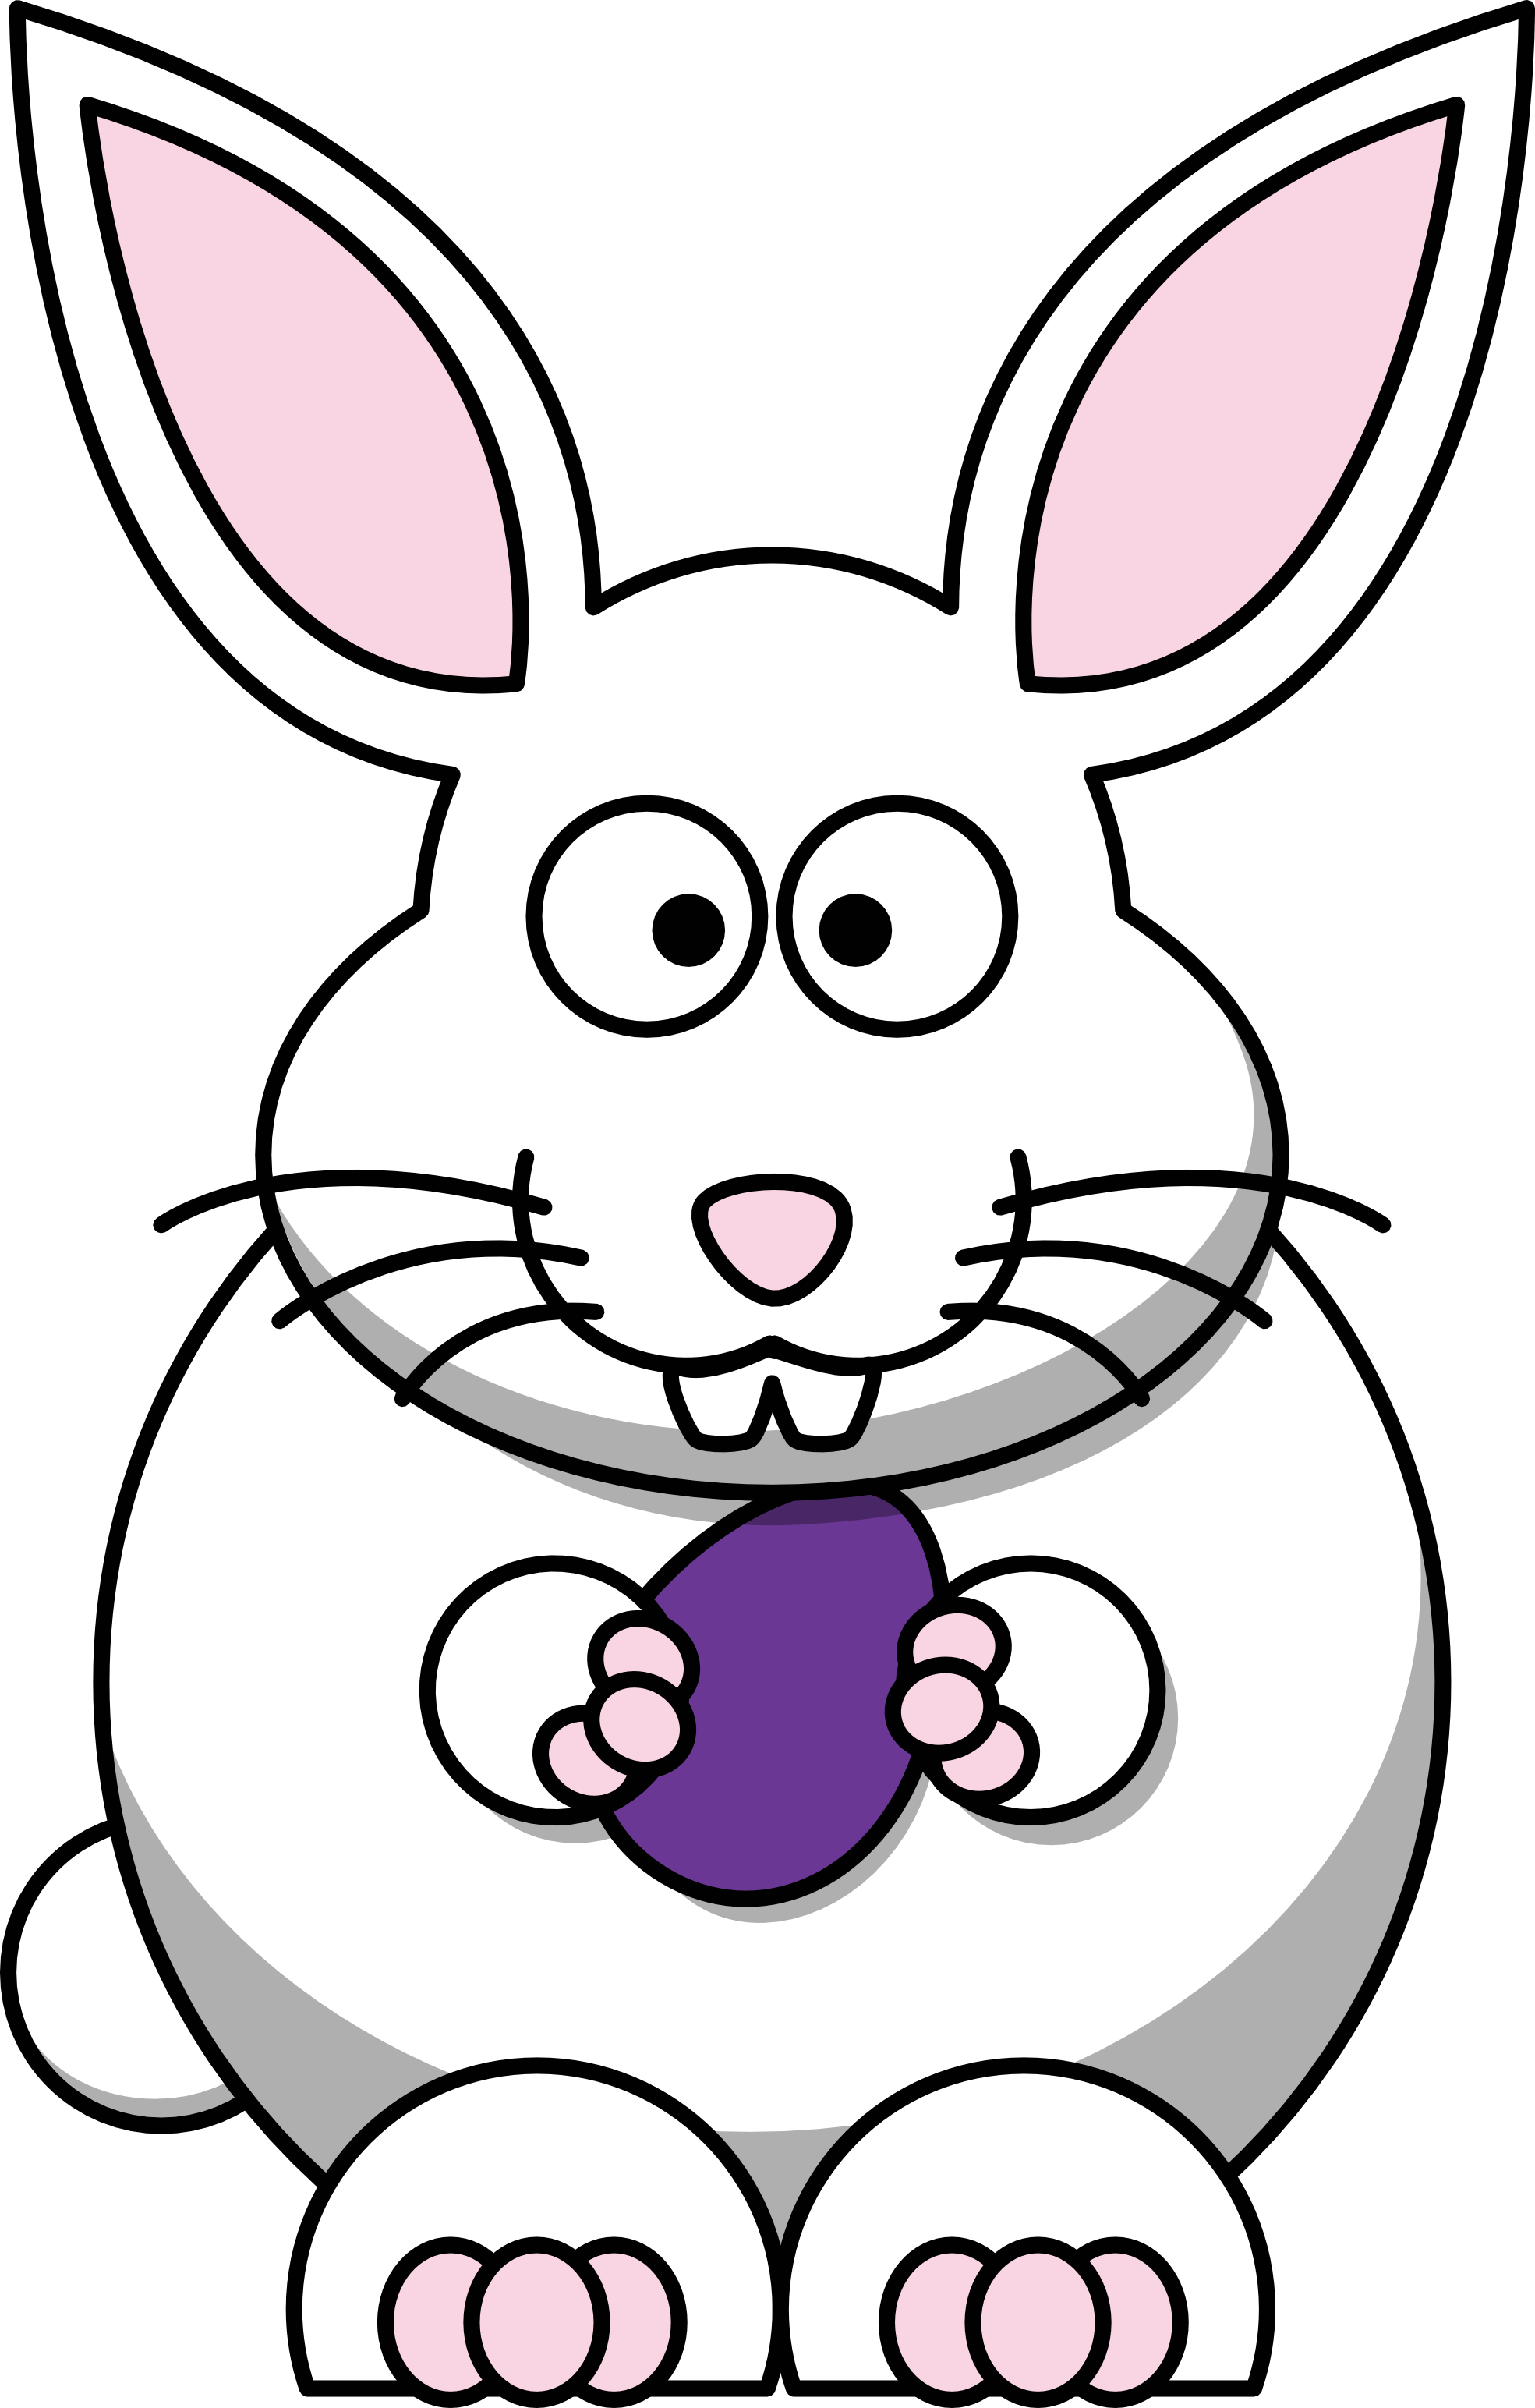 Free Cartoon Bunny Images, Download Free Clip Art, Free Clip.